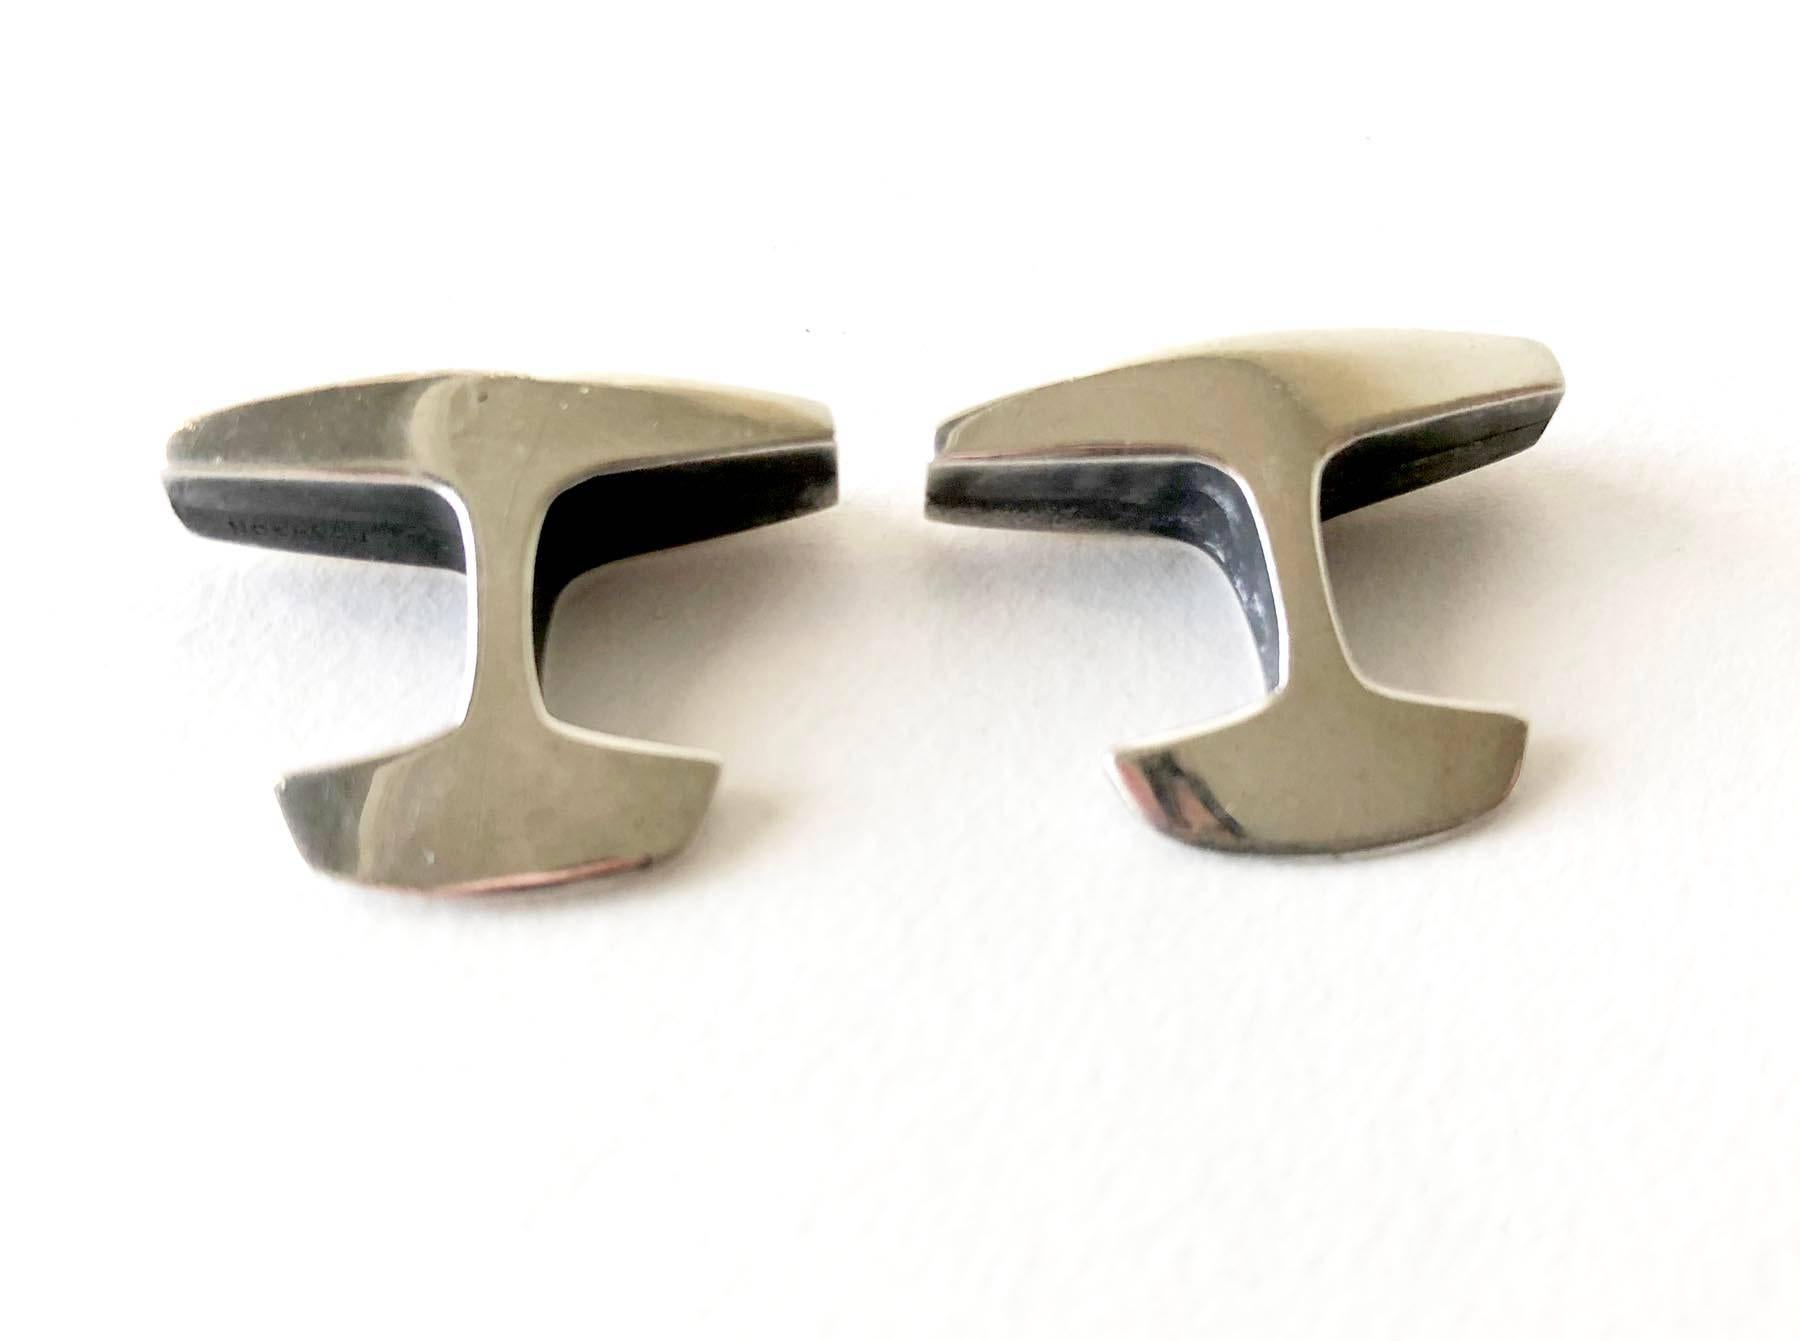 Sterling silver mid century modern cufflinks created by Ronald Pearson of Rochester, NY.  Cufflinks measure 1